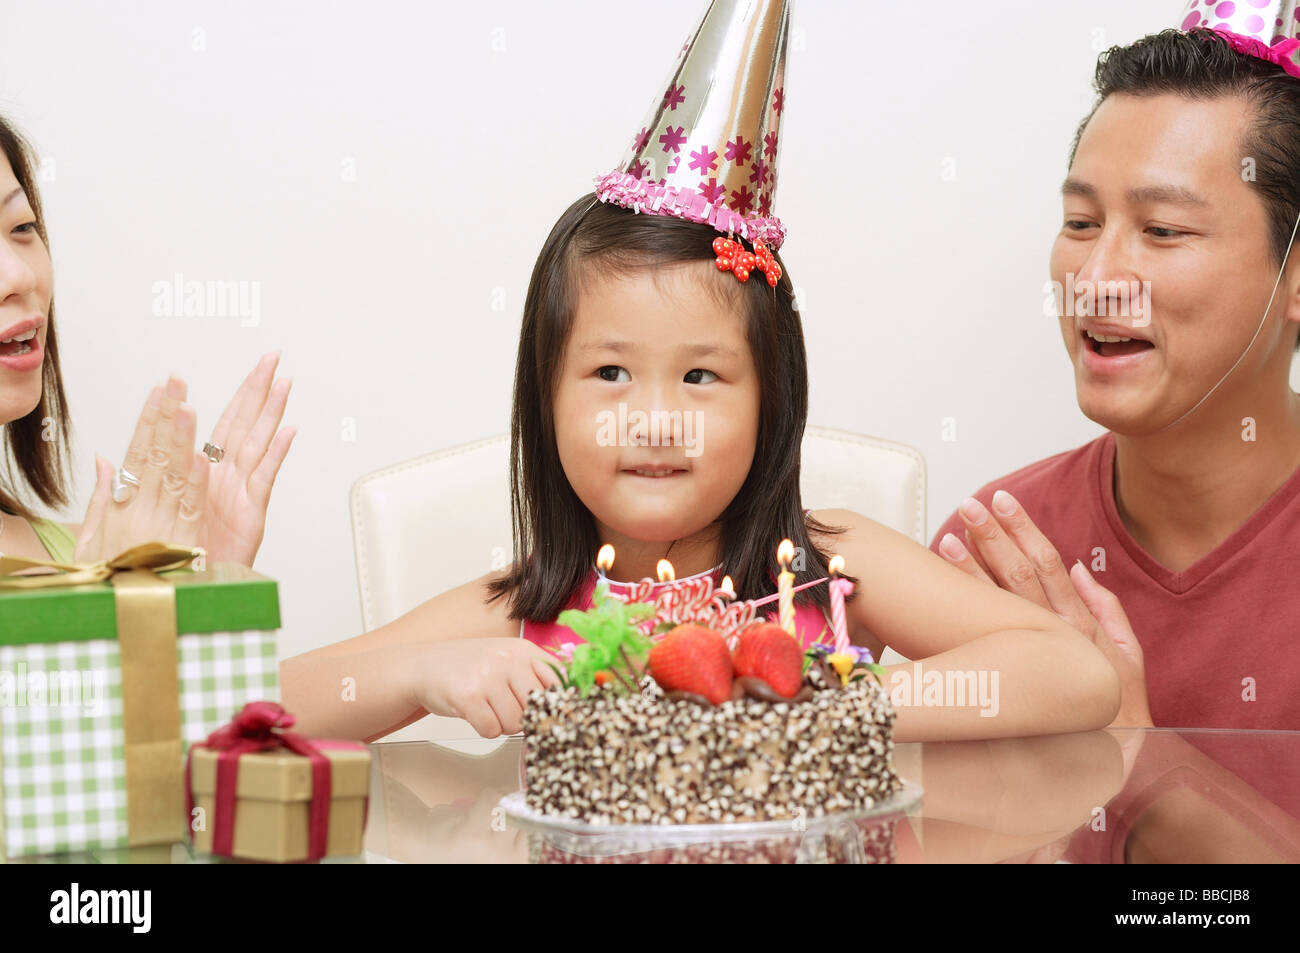 Girl with birthday cake, parents on either side clapping Stock Photo